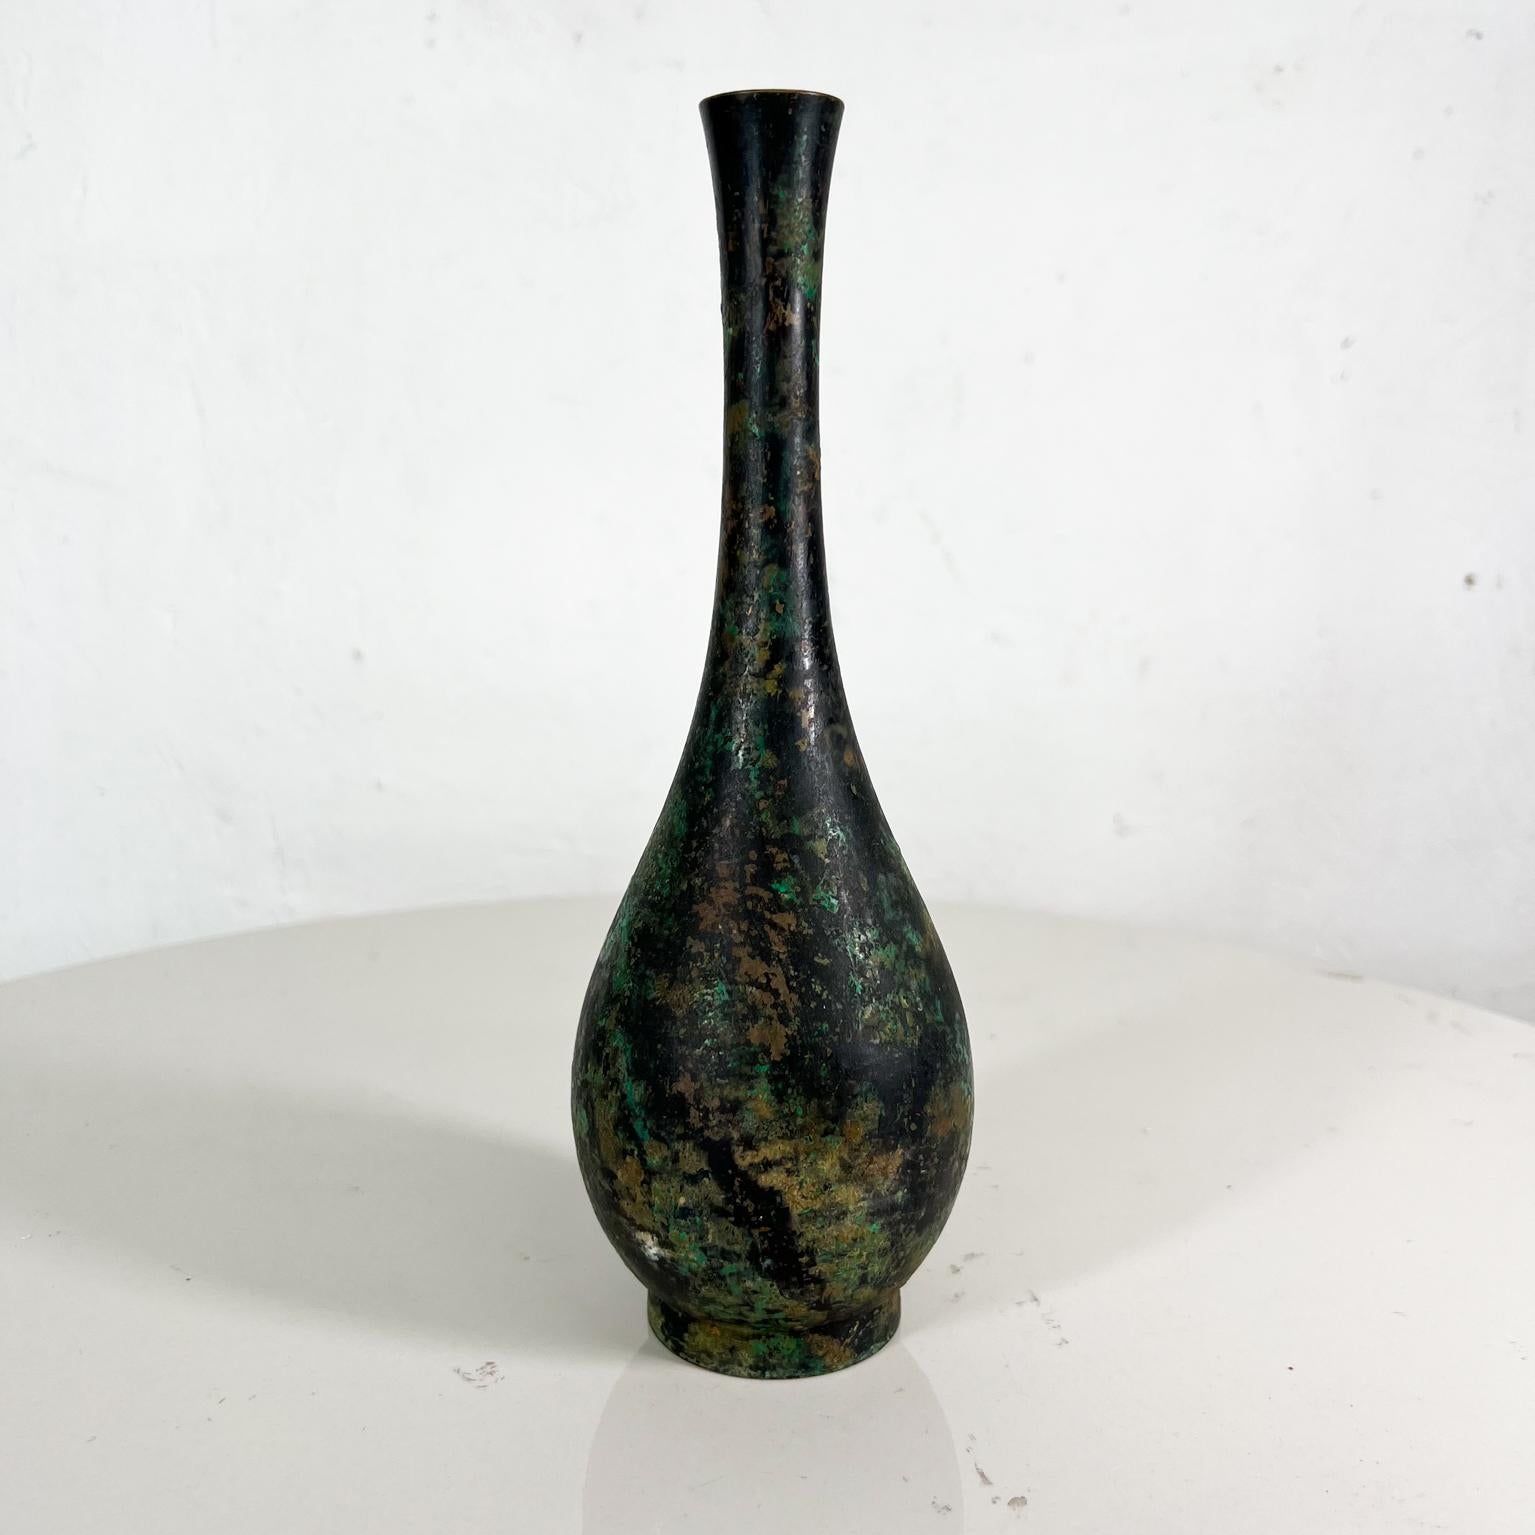 Mid-20th century lovely Japanese iron vase patinated vintage.

Vintage elegance classic Japanese vase iron patinated finish
Green, black and brown tones.
No stamp present. Japanese attribution.
Measures: 9 tall x 3 in diameter
Preowned